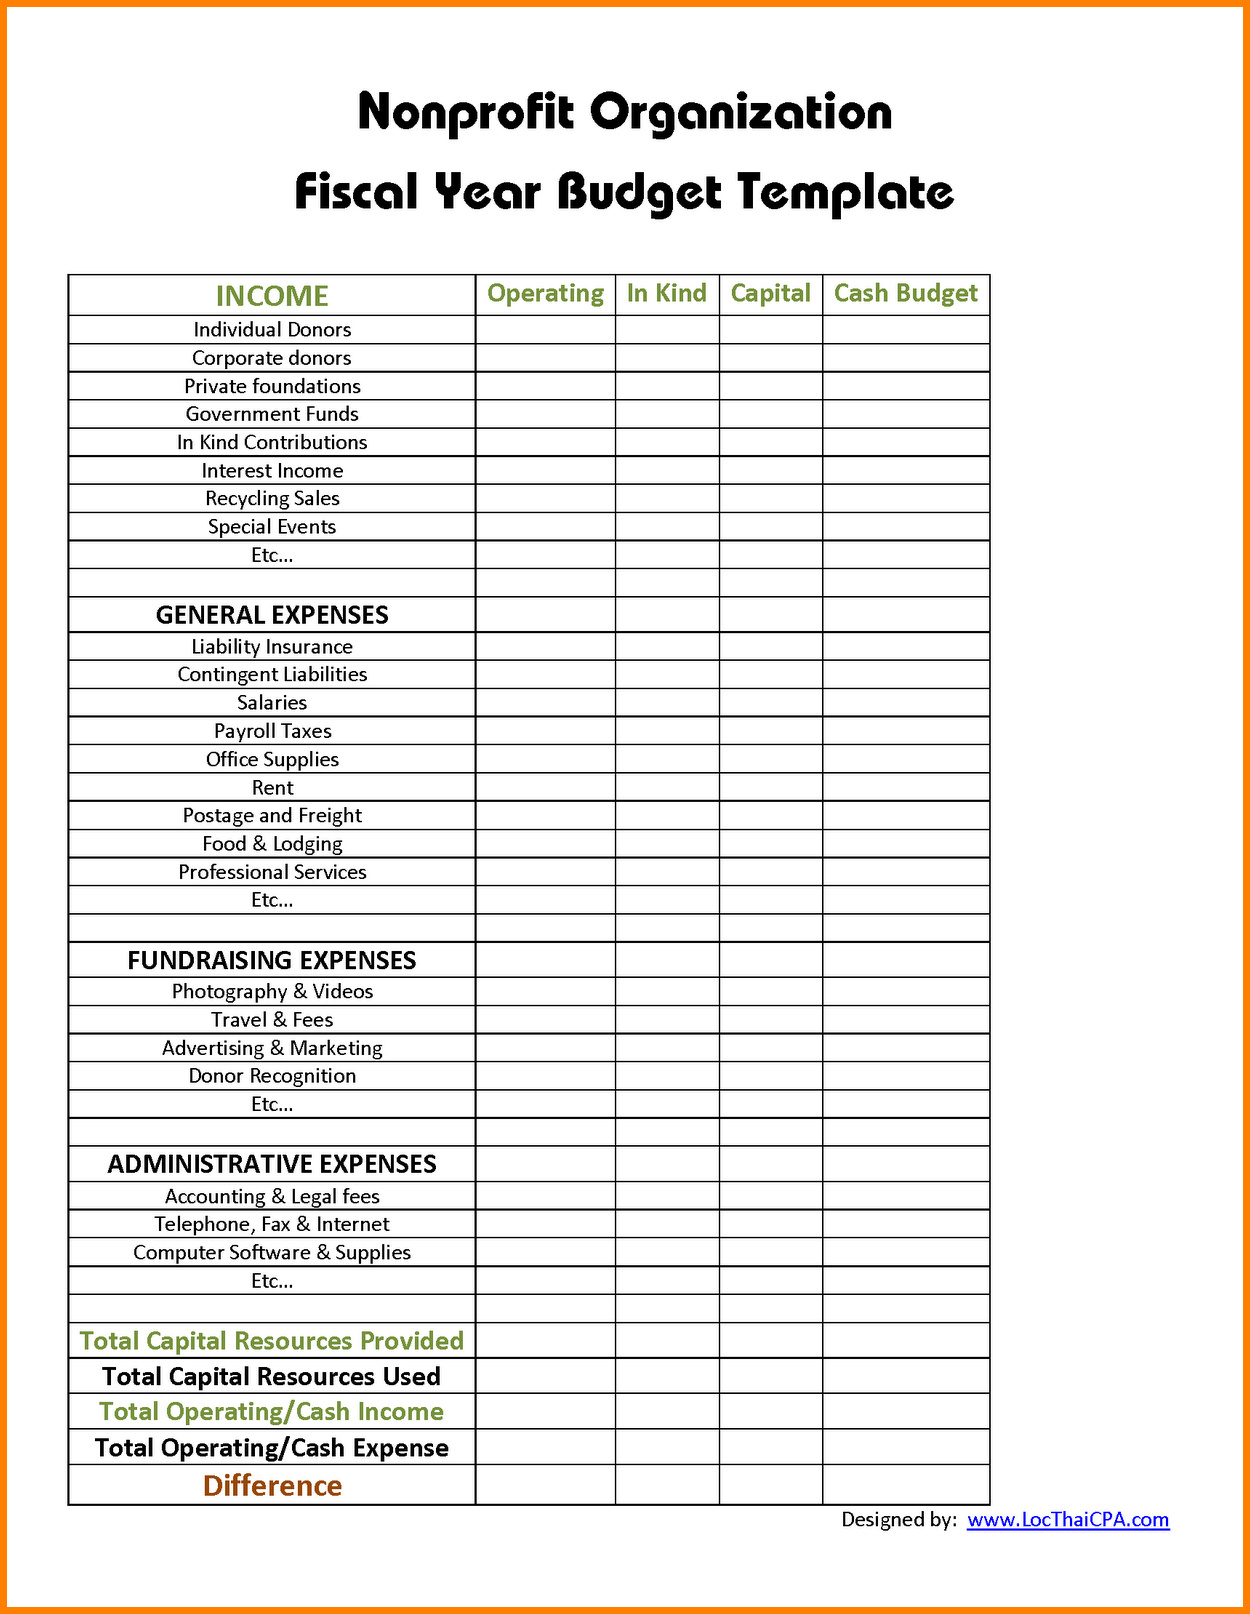 Non Profit Budget Template Excel | My Spreadsheet Templates inside Profit Spreadsheet Template